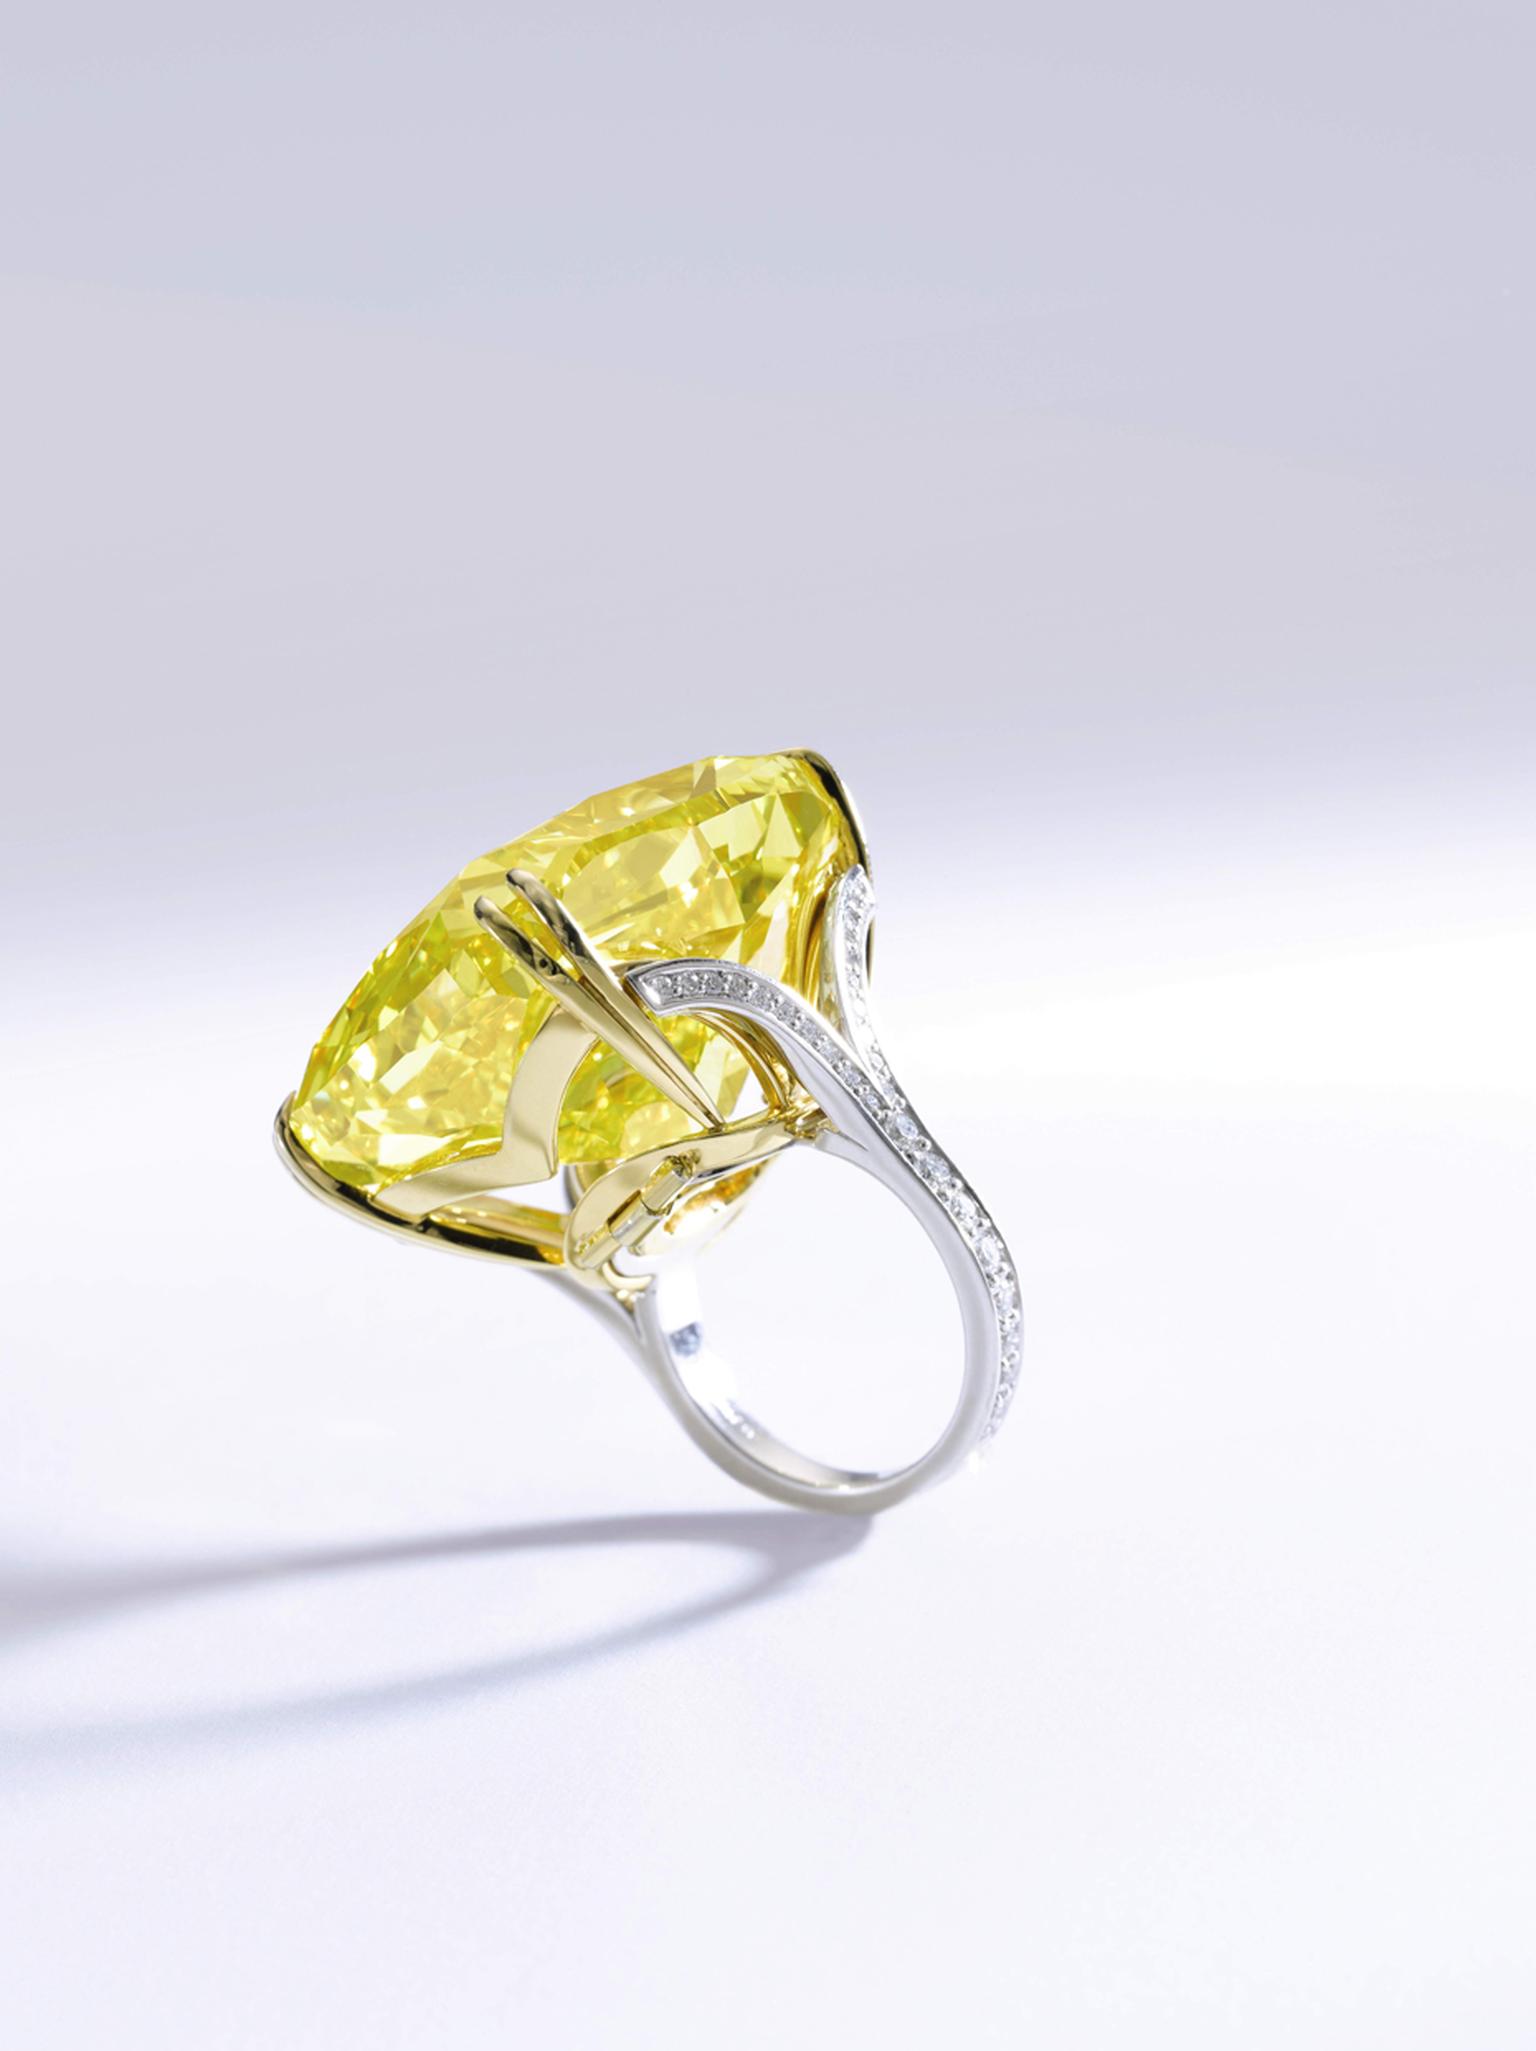 The Graff Vivid Yellow diamond ring features shoulders embellished with brilliant-cut diamonds. Sold for CHF 14.5million (estimate: CHF 13.4- 22.3million)